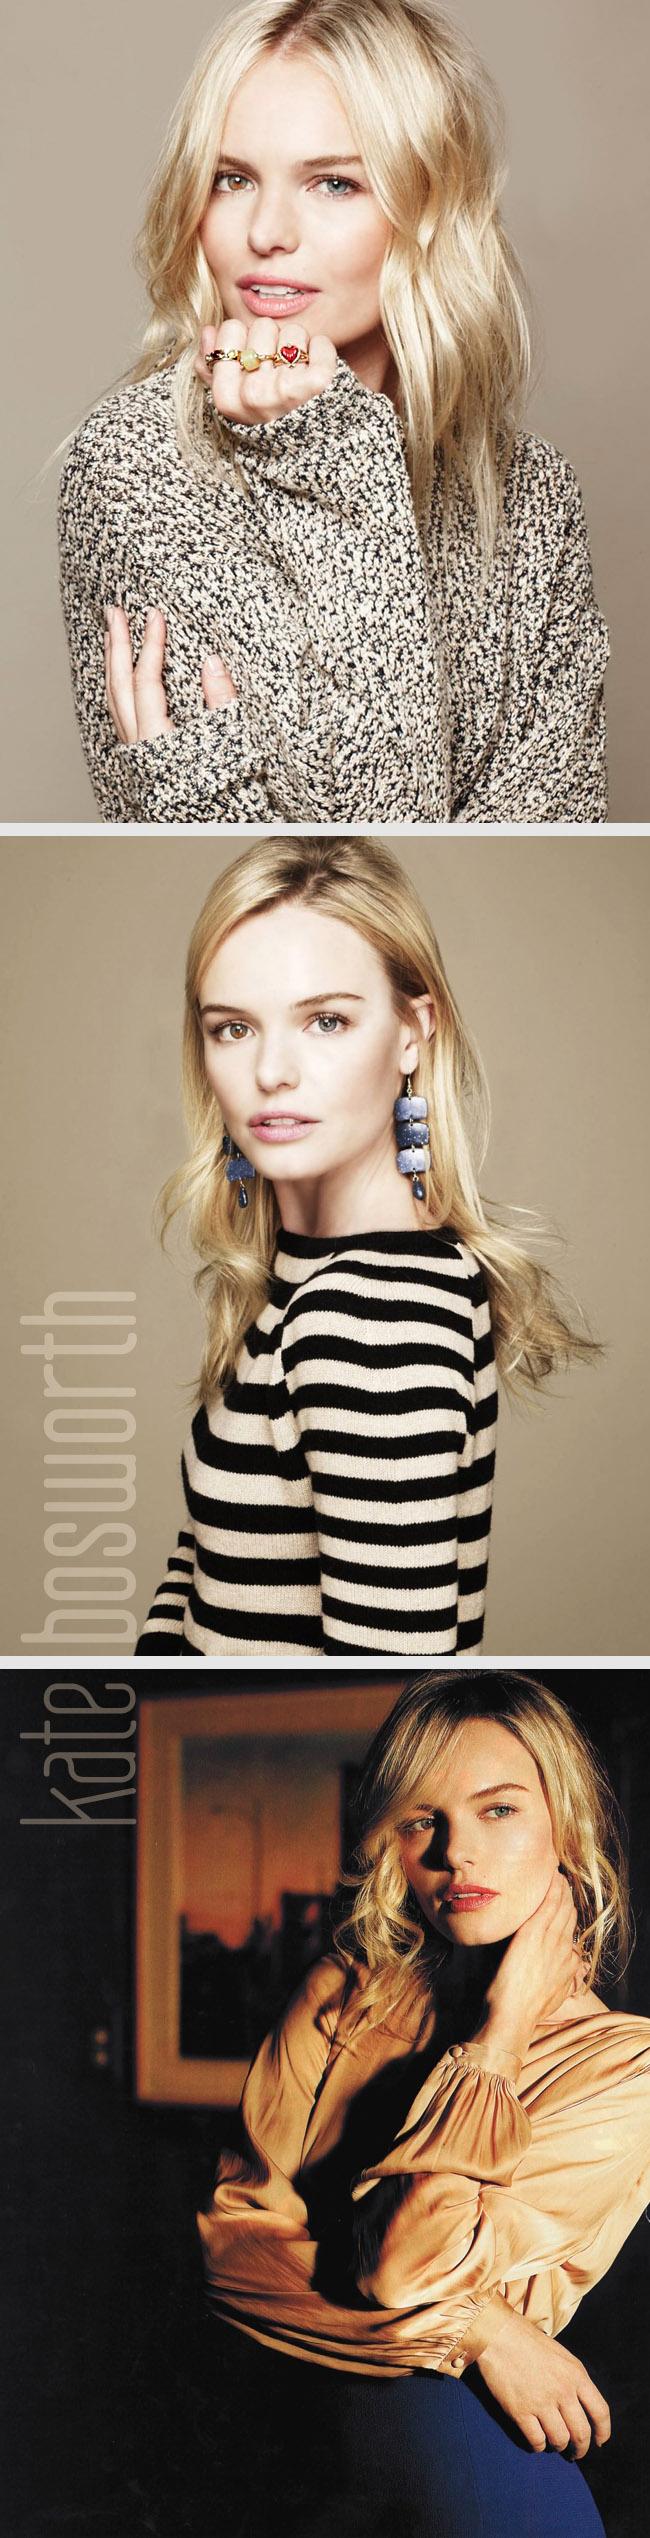 fashion brands... jewelmint by kate bosworth